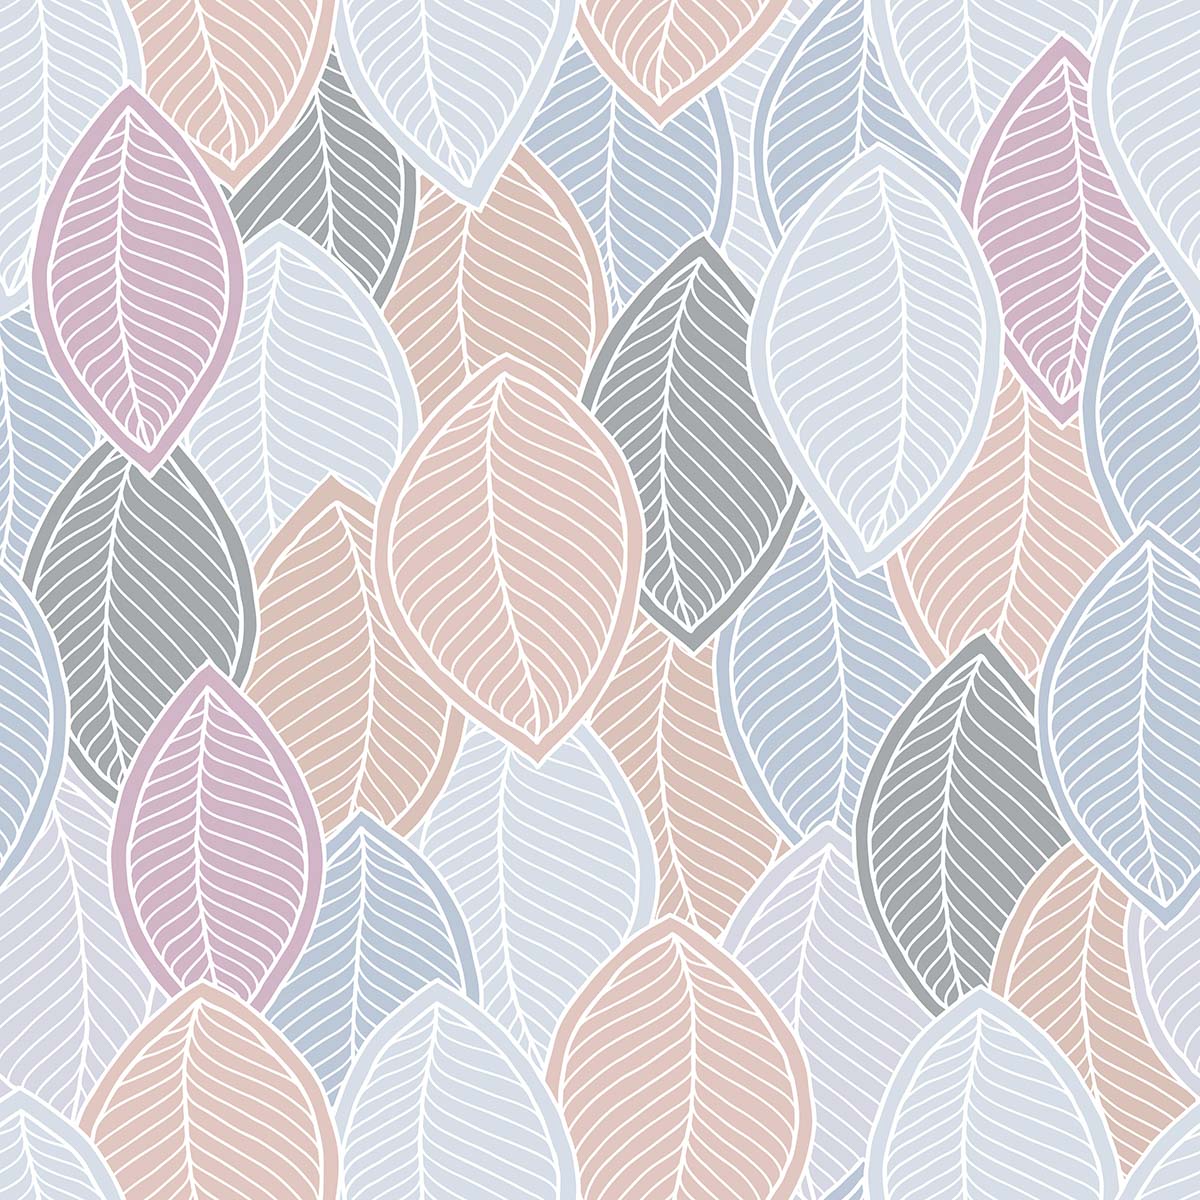 A pattern of leaves